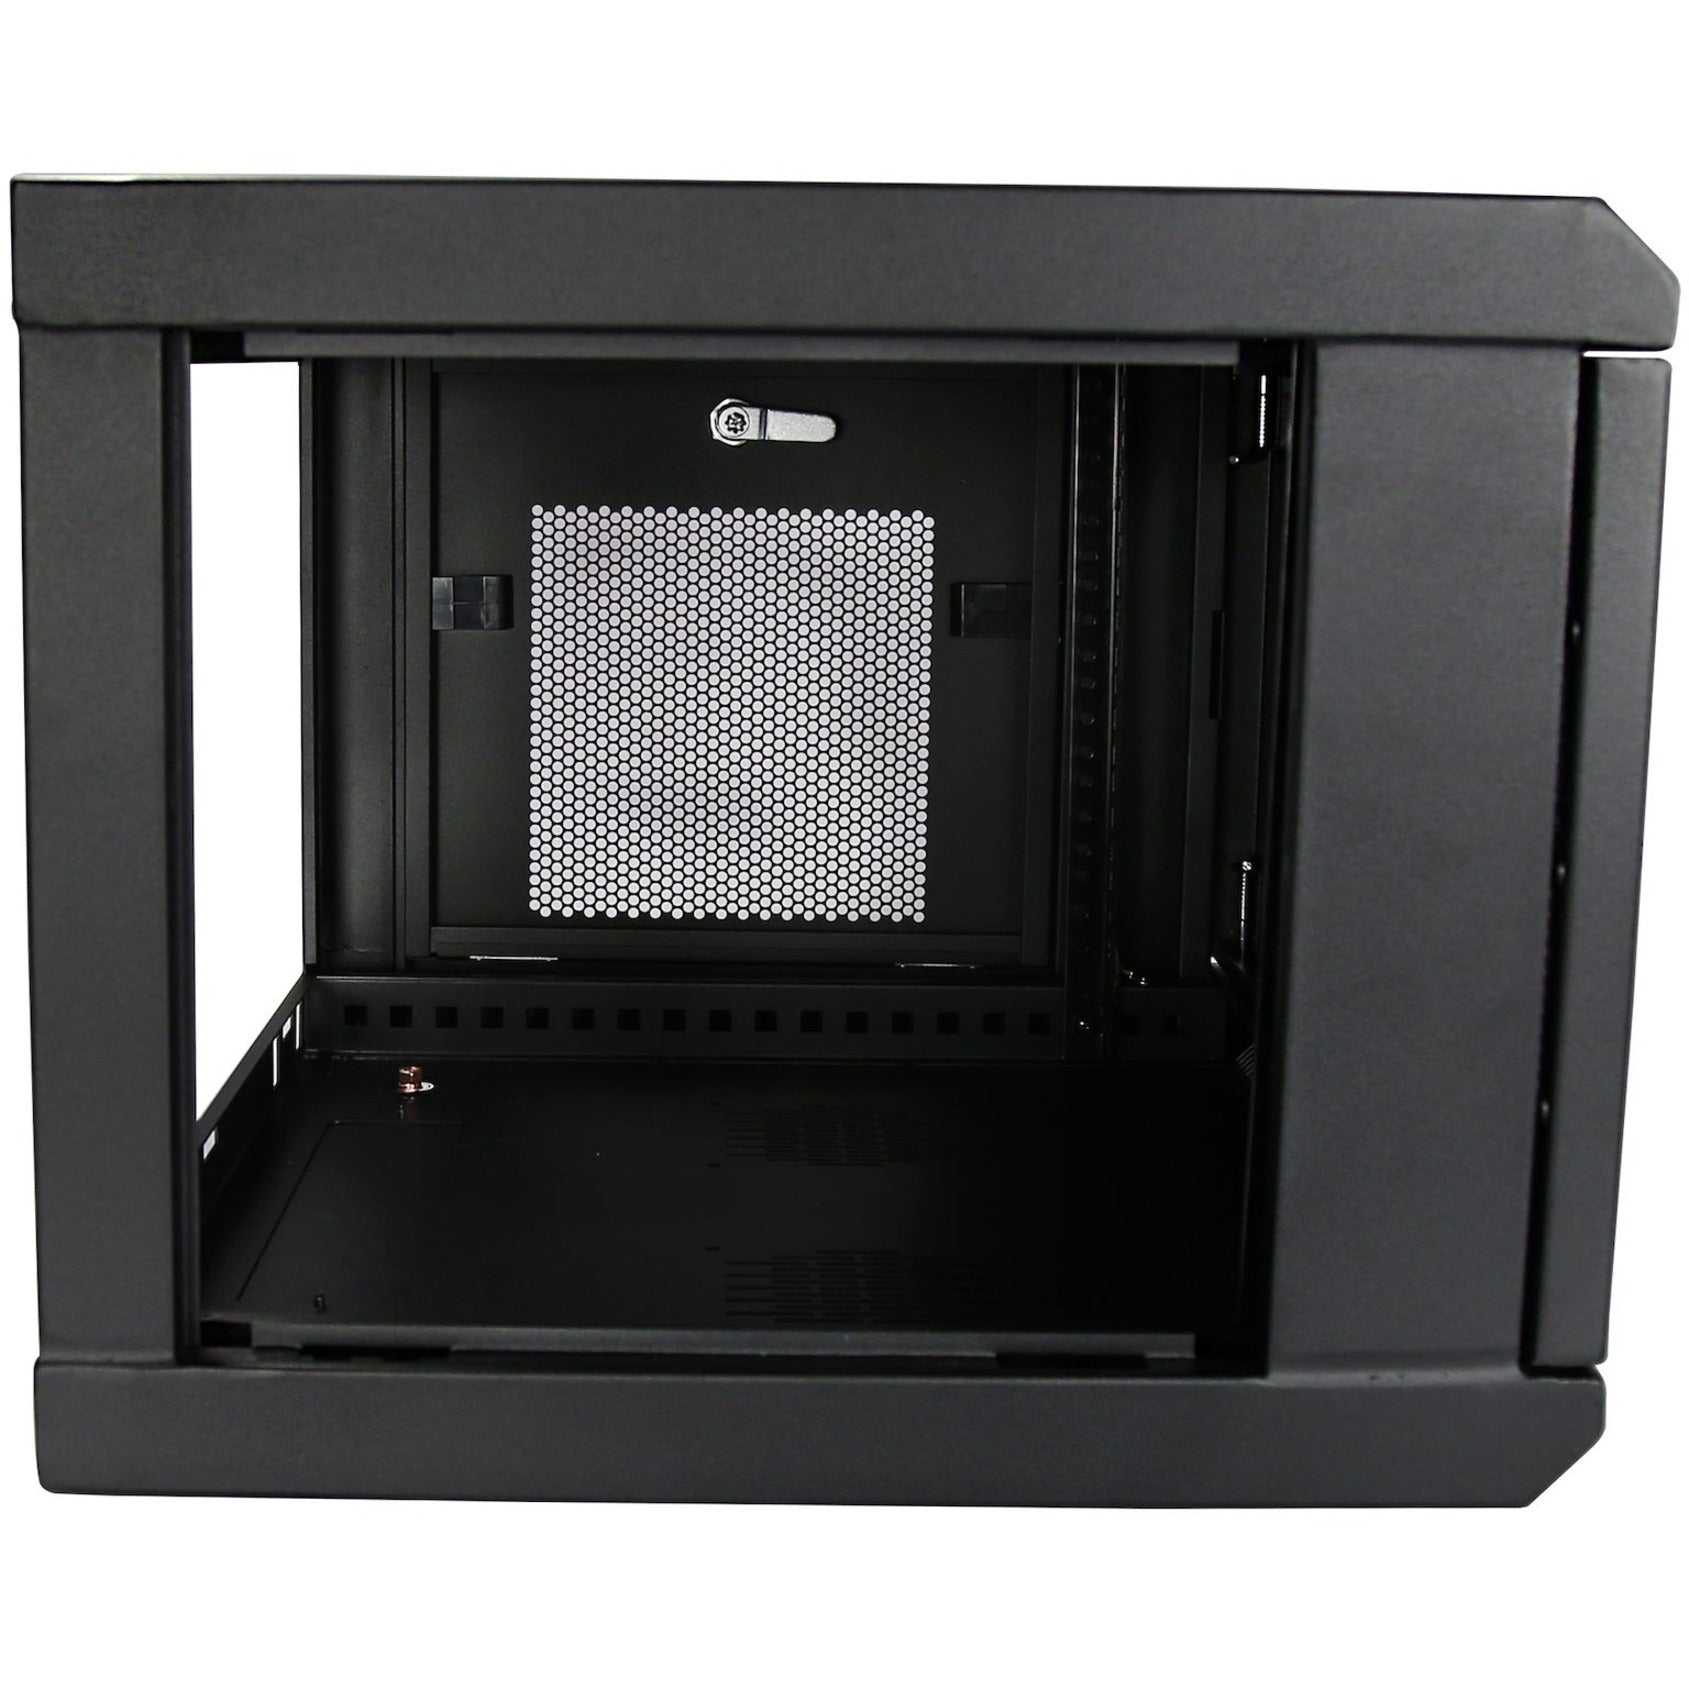 StarTech.com RK616WALM 6U Wall-Mount Server Rack Cabinet - Up to 16.9 in. Deep, Vented, Cable Management, Adjustable Mounting Rails